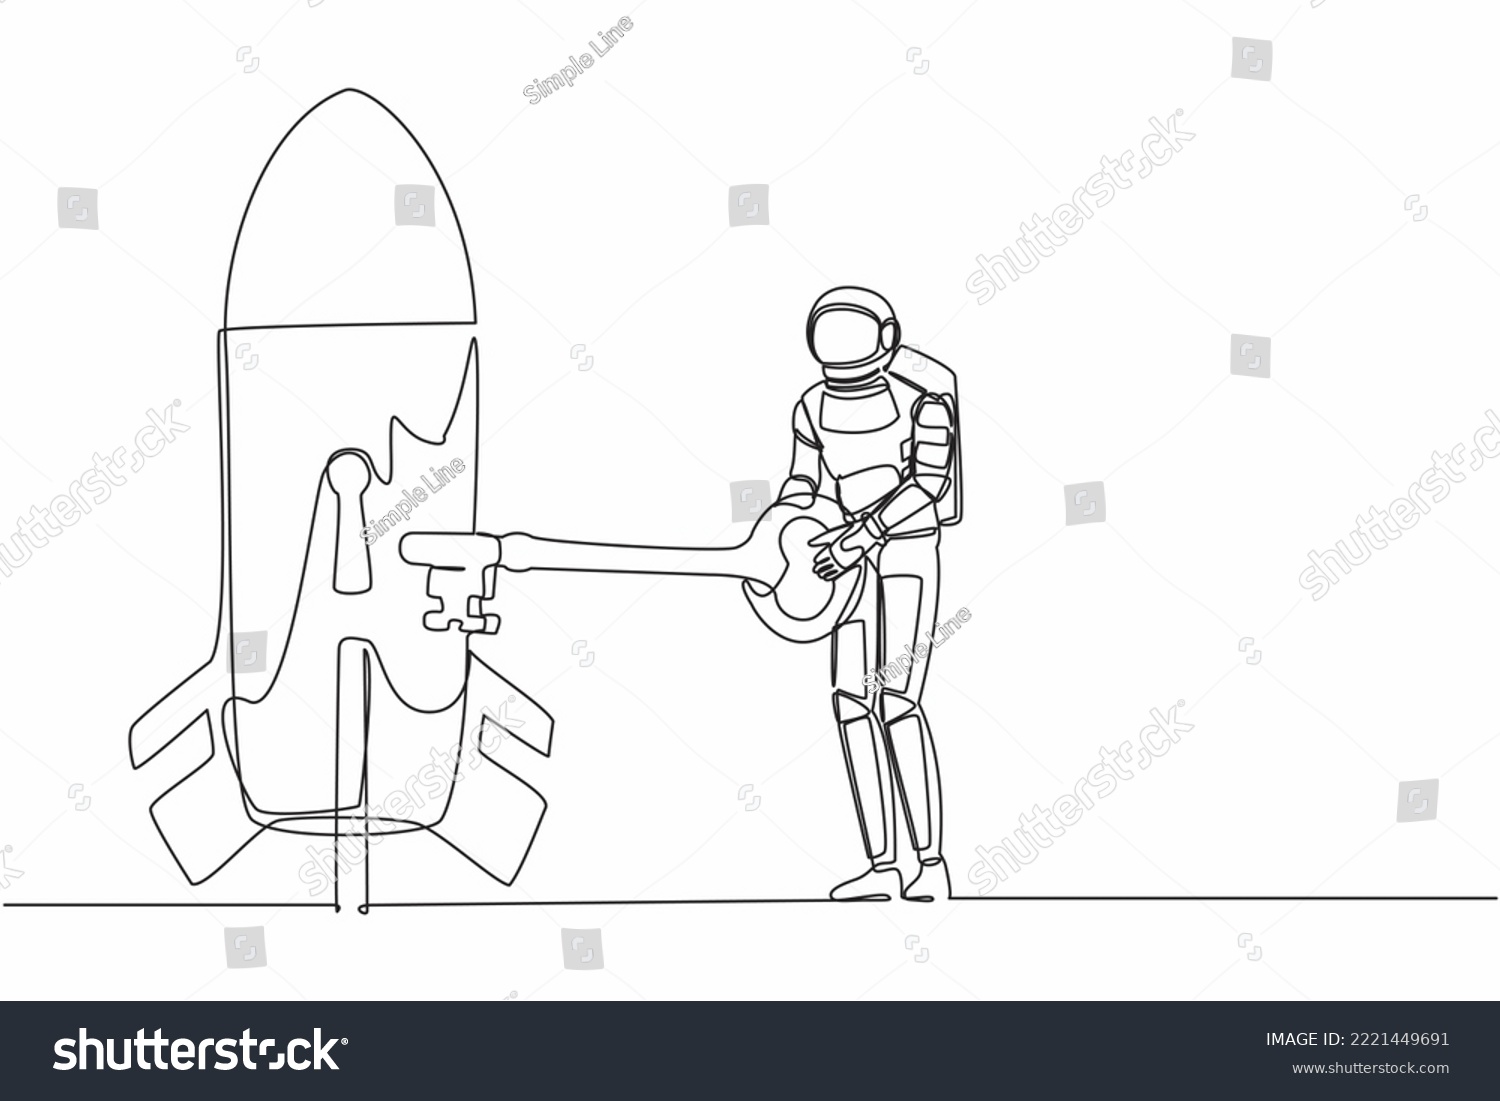 SVG of Single continuous line drawing young astronaut putting key into rocket. Launching satellite or spaceship galactic expedition. Cosmonaut deep space concept. One line design vector graphic illustration svg